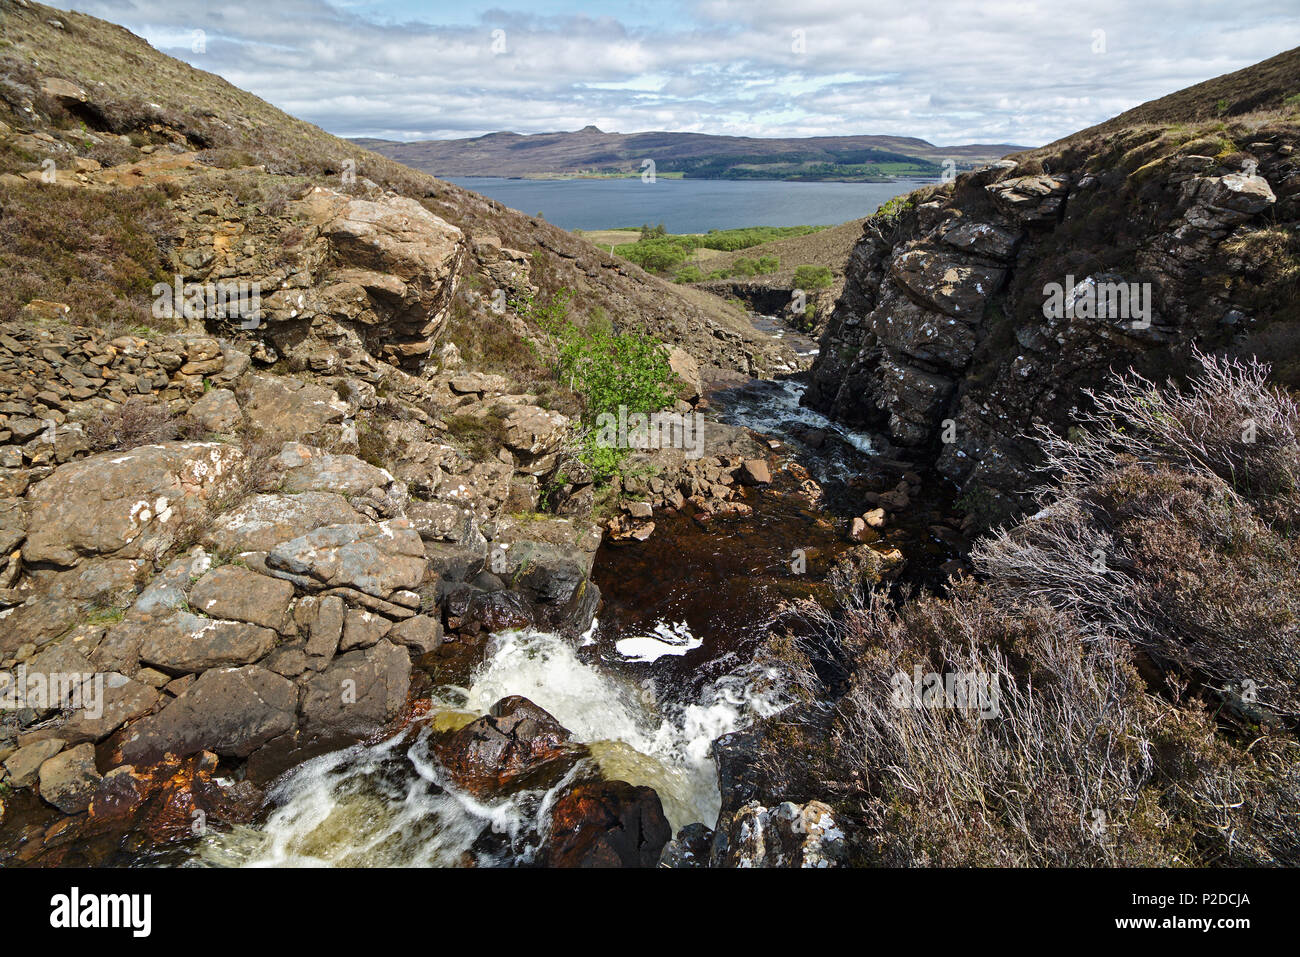 Isle of Skye, Scotland - Downstream view of a waterfall of the river Ollach running through a narrow gorge with the Sound of Raasay in the distance Stock Photo